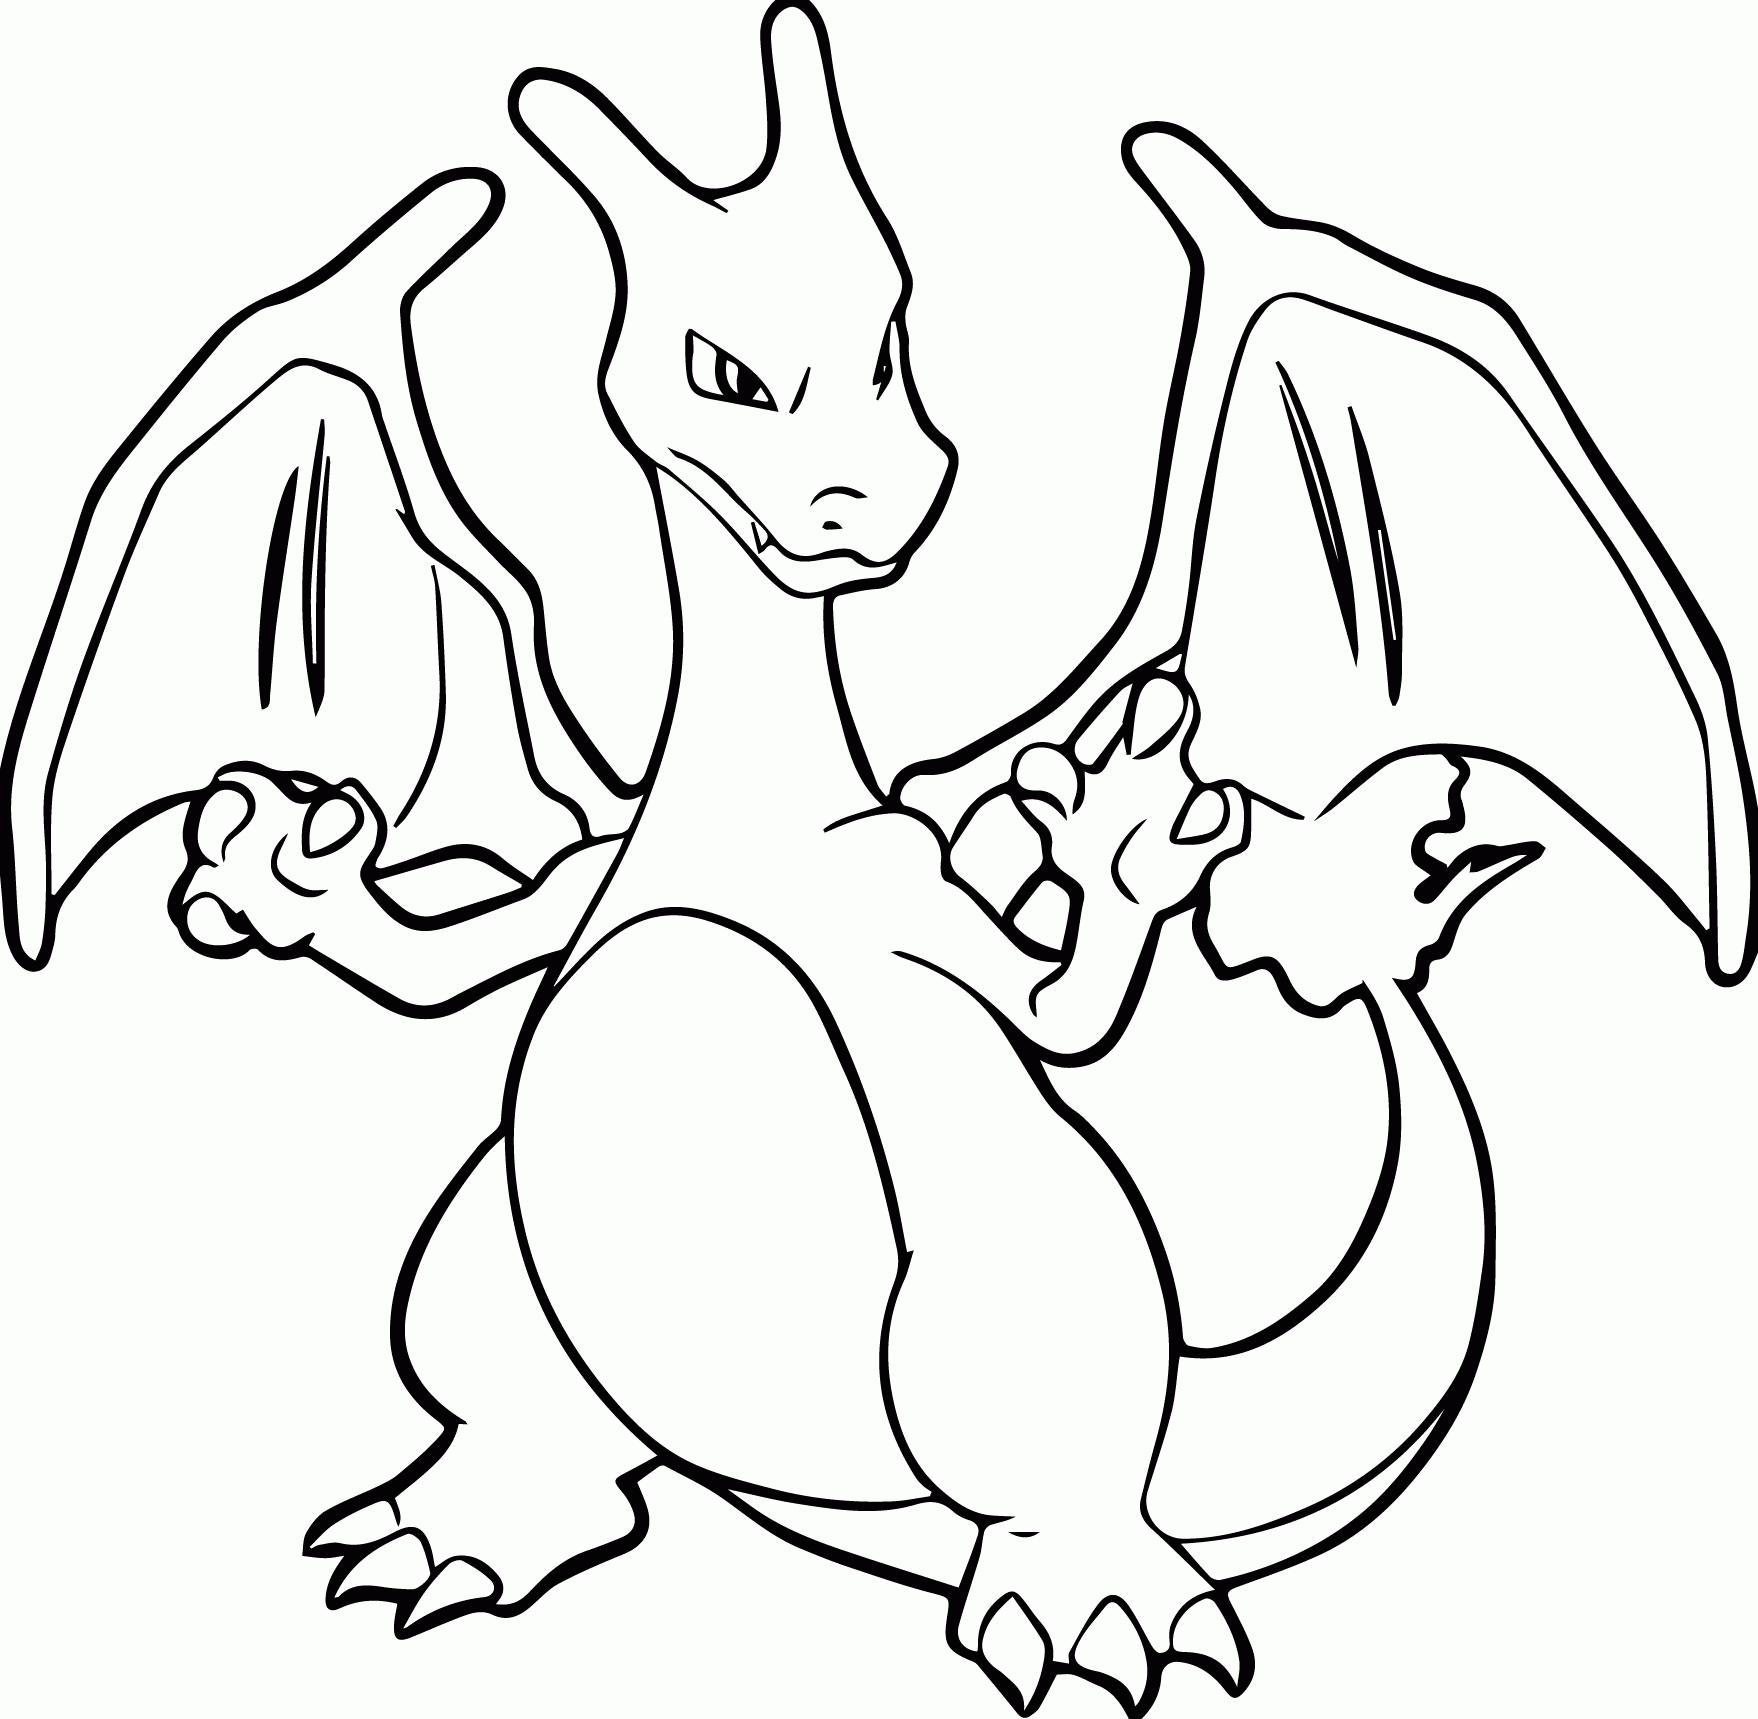 Pintable Charizard Pokemon Coloring Pages - Coloring Home